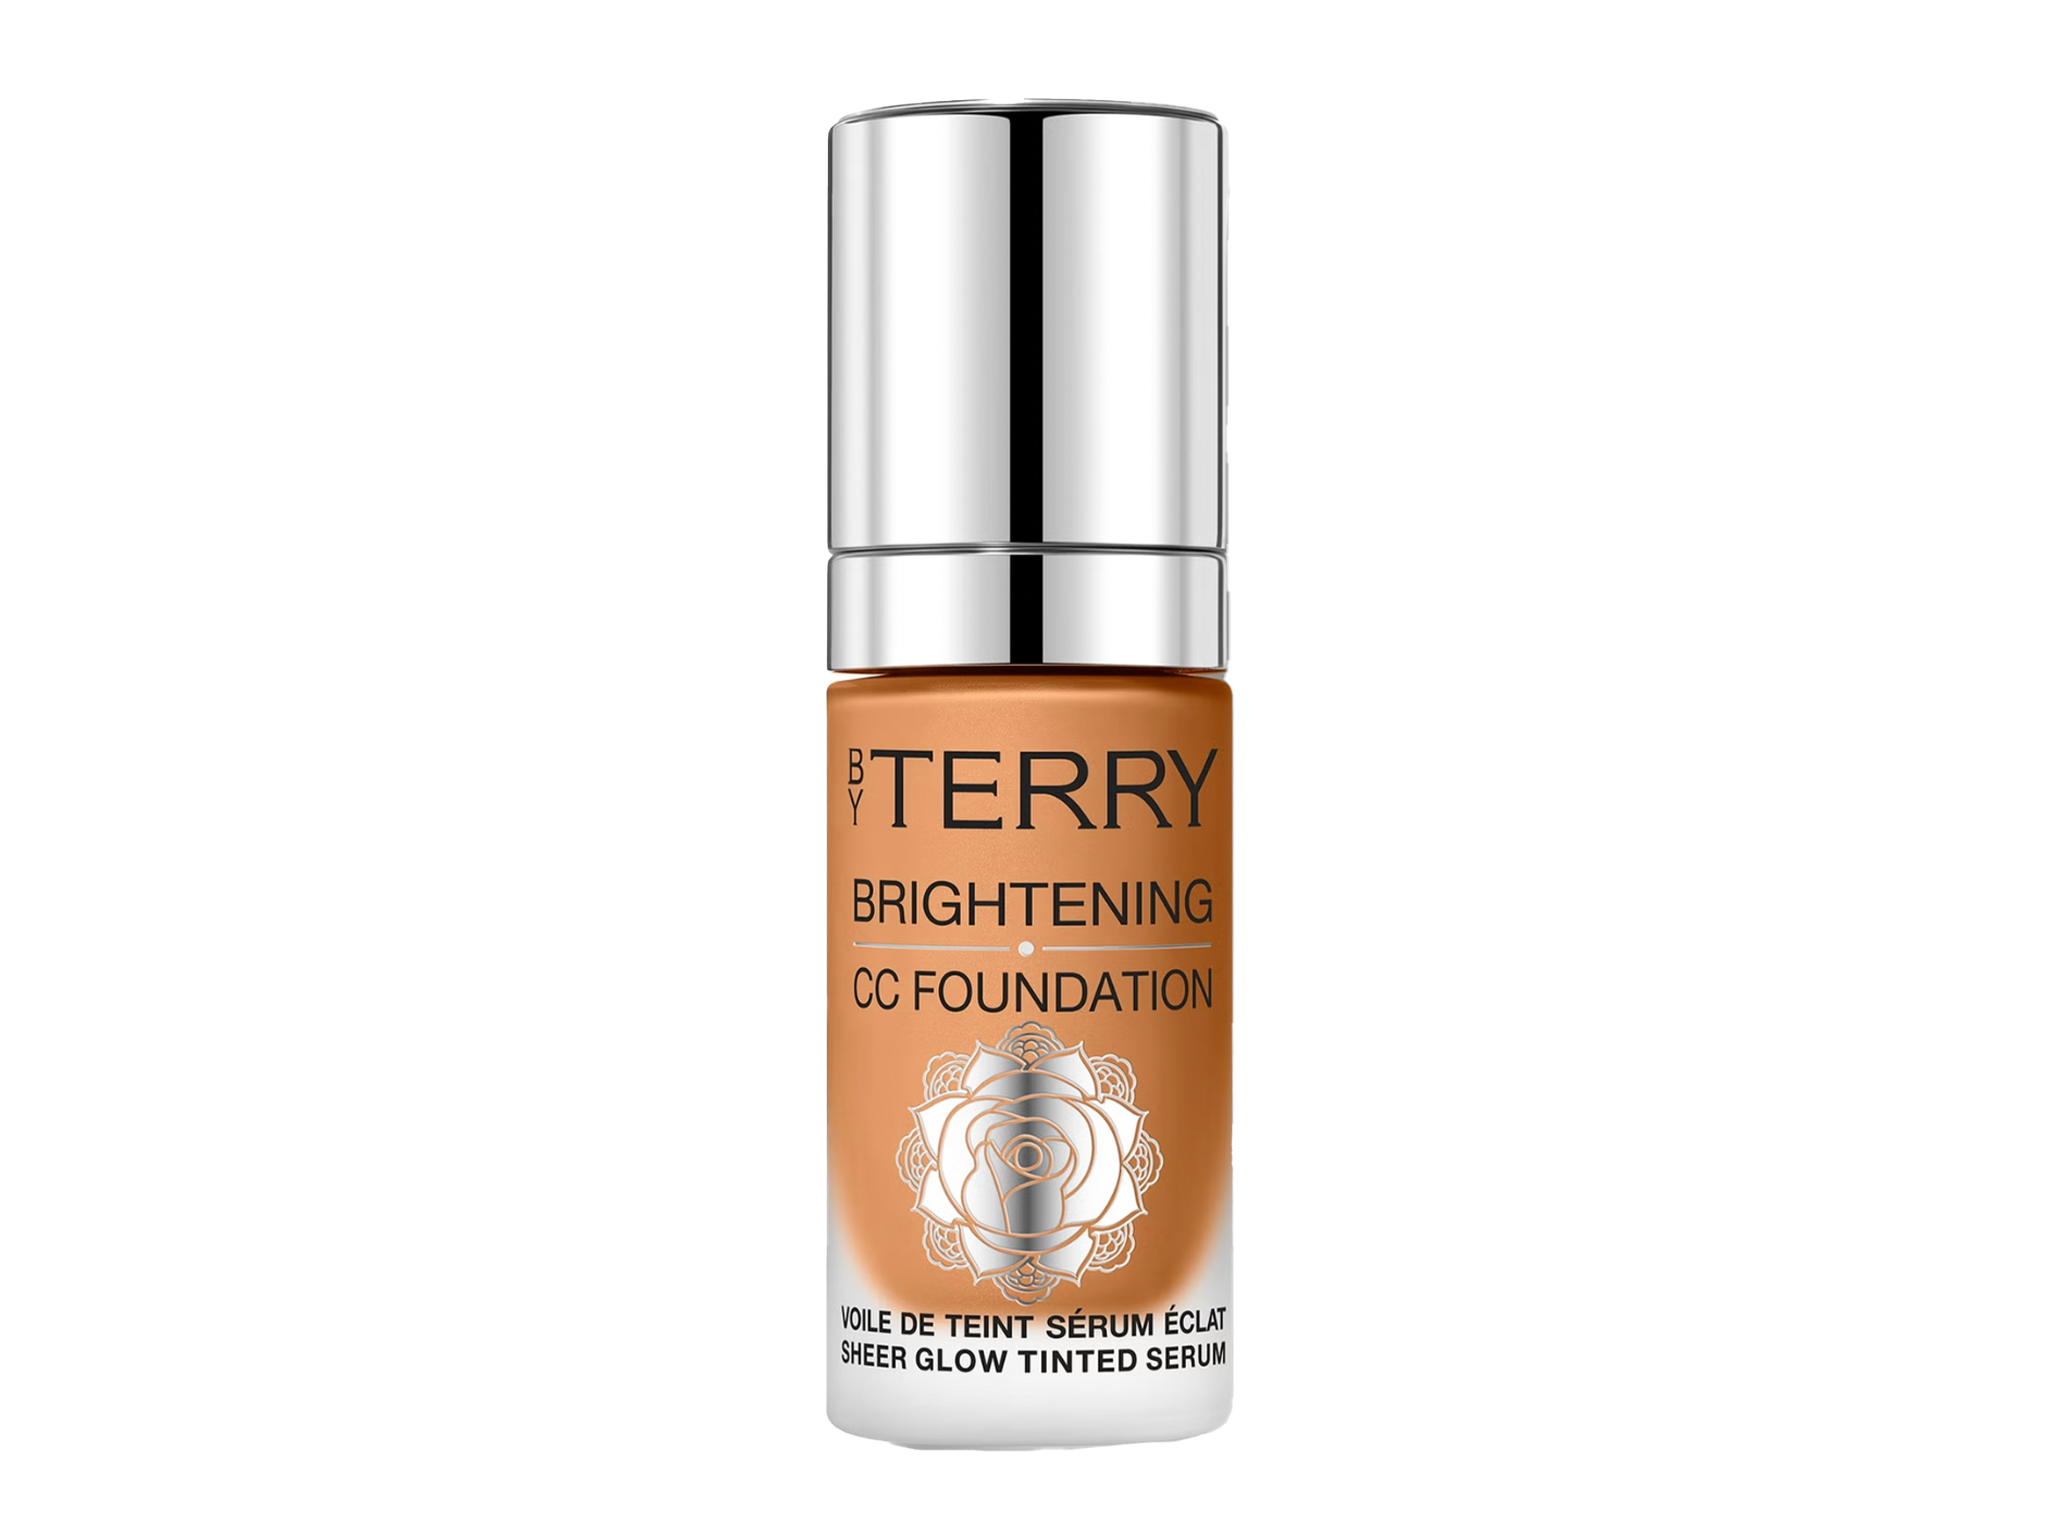 By Terry brightening CC foundation